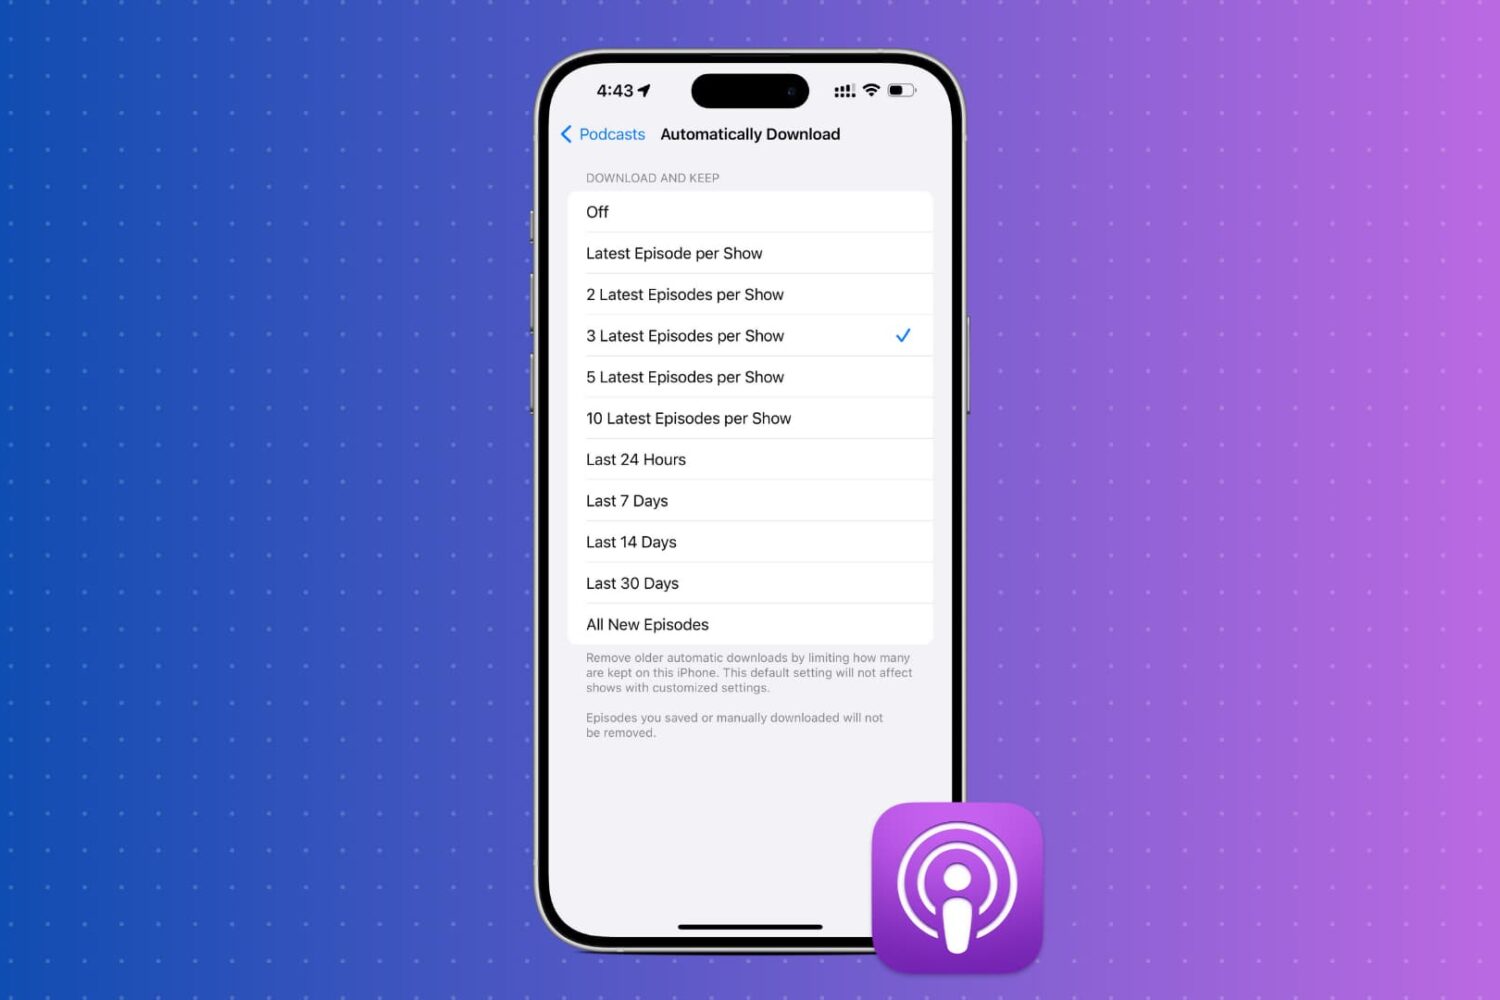 Podcasts app automatic download settings